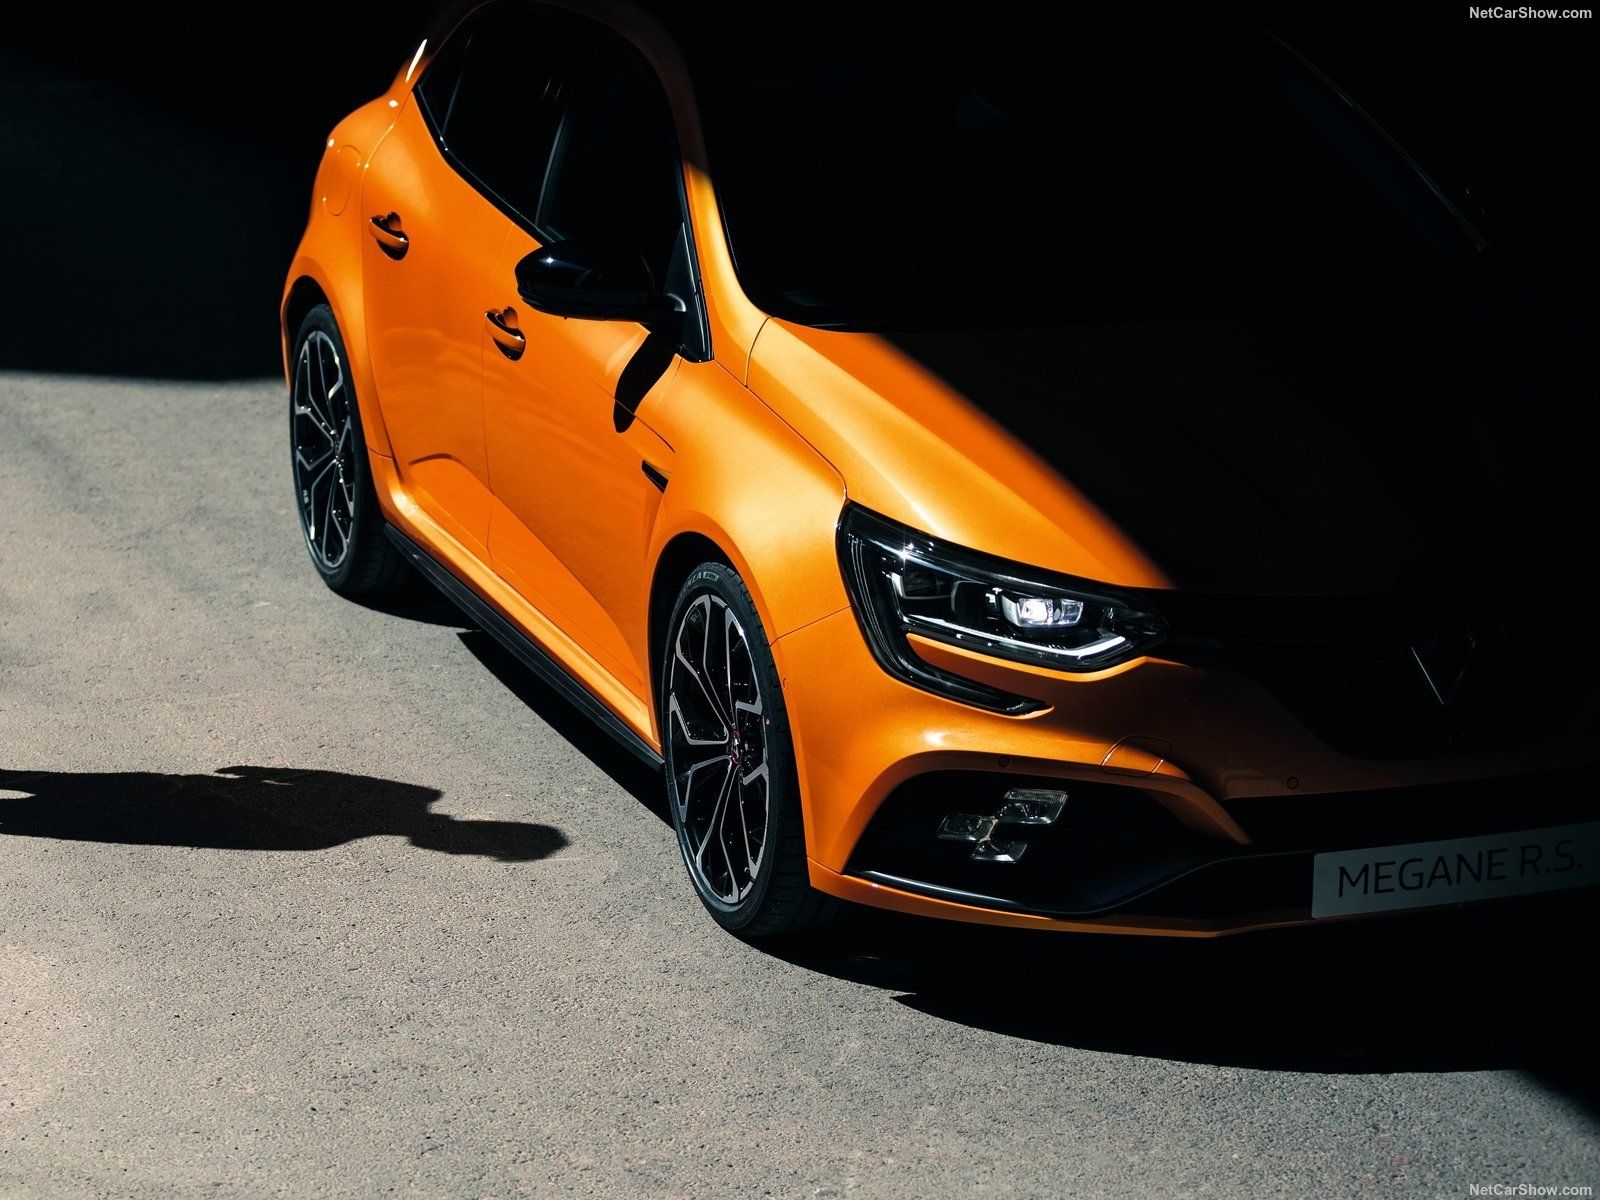 Renault Megane RS picture. Renault photo gallery